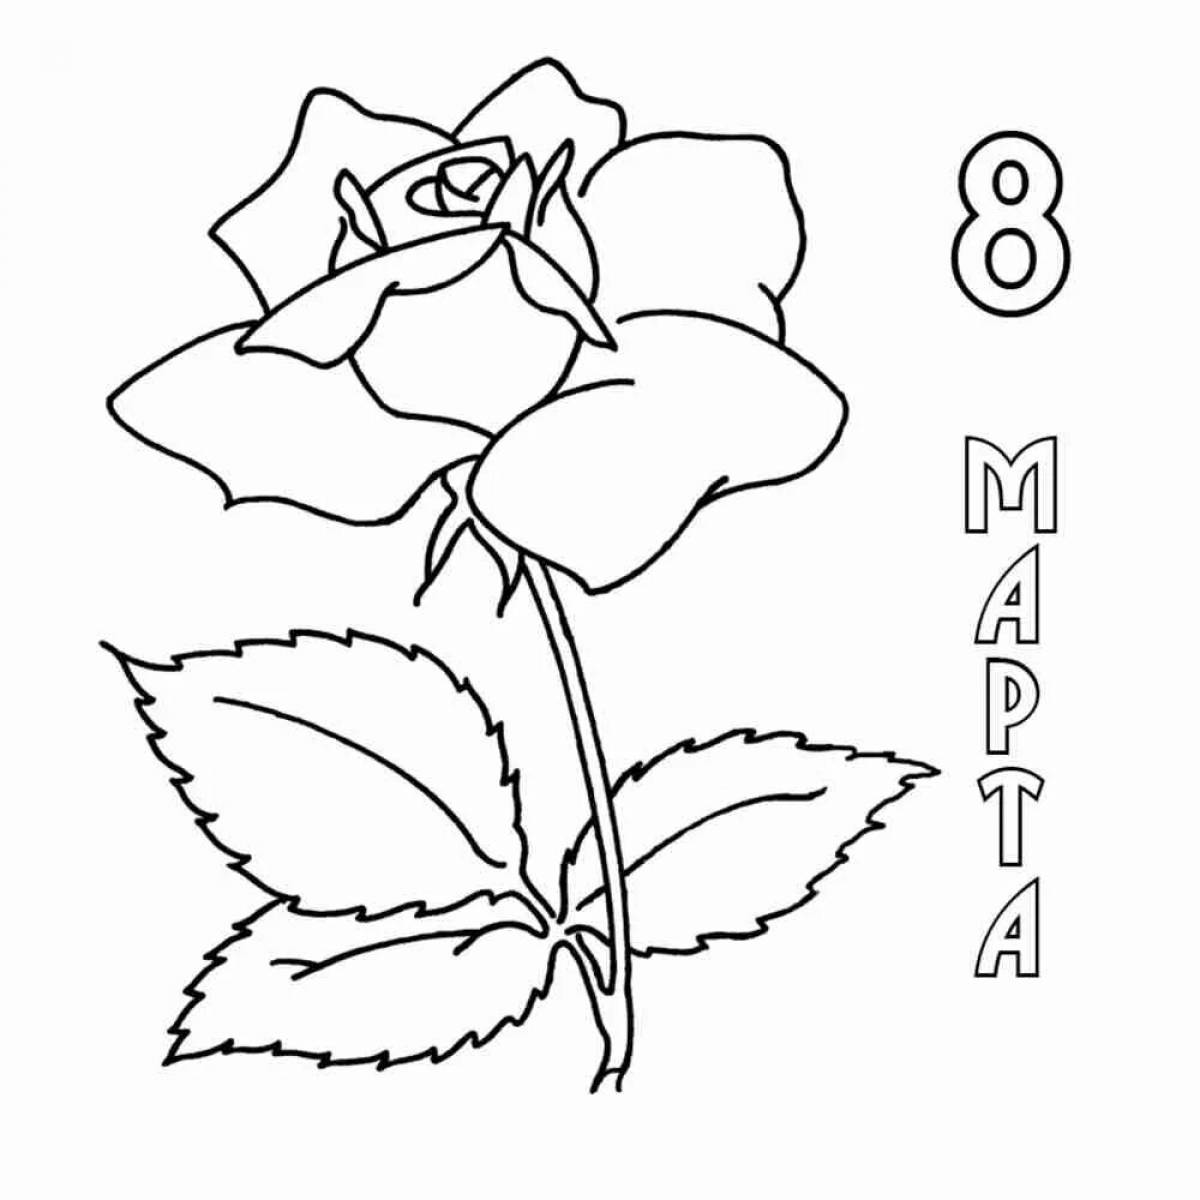 Раскраски по номерам - цветы | Spring coloring pages, Free coloring pages, Flower coloring pages